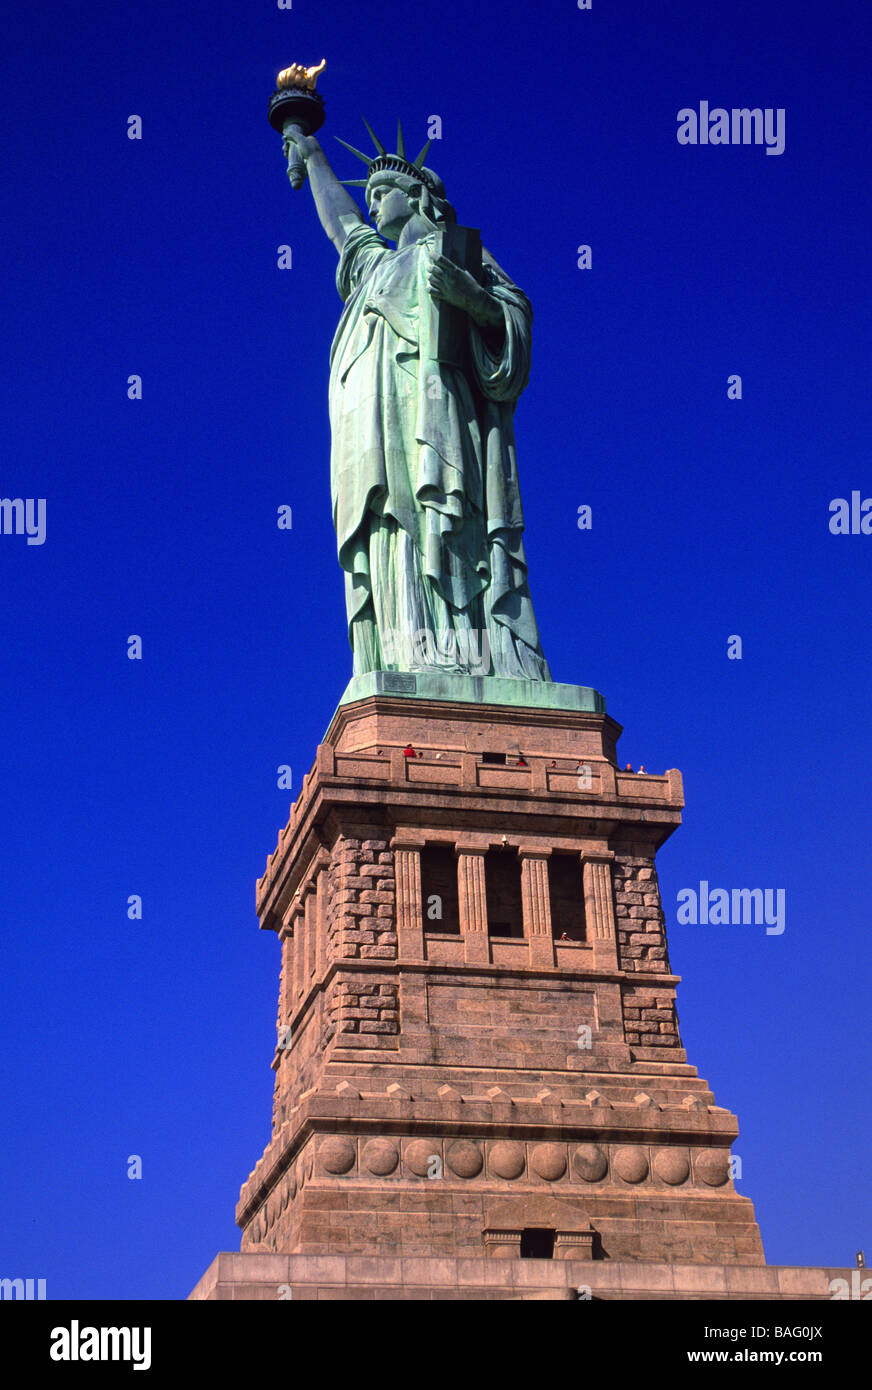 Statue of Liberty New York USA Banque D'Images